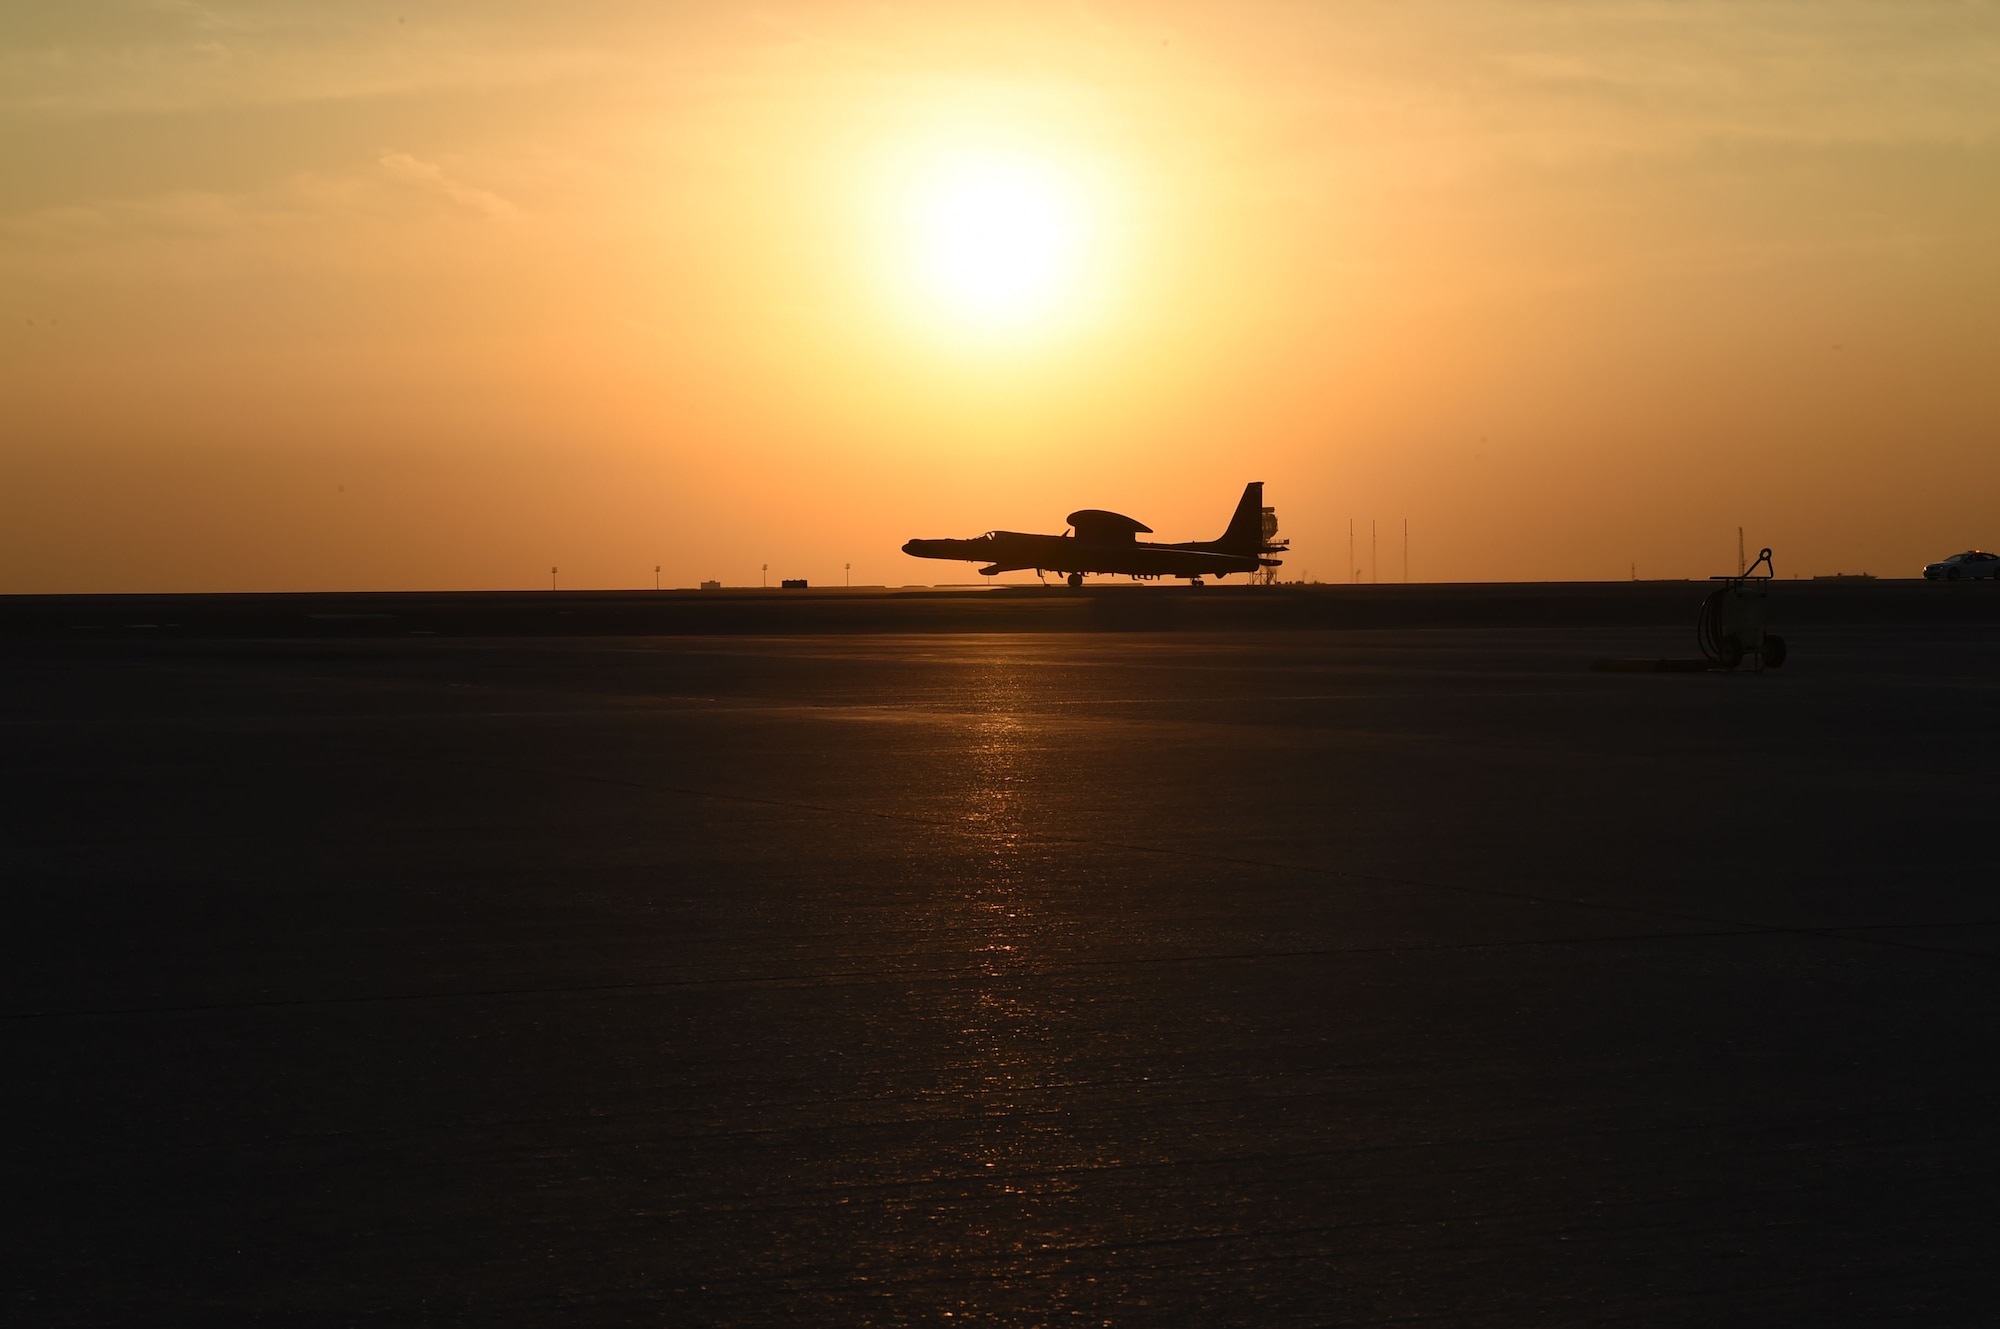 A U-2 taxis back towards the maintenance hangar at an undisclosed location in Southwest Asia after a sortie, Dec. 15, 2016. This sortie marked the final flight of one of the mission systems that the U-2 is capable of carrying. (U.S. Air Force photo by Tech. Sgt. Christopher Carwile)